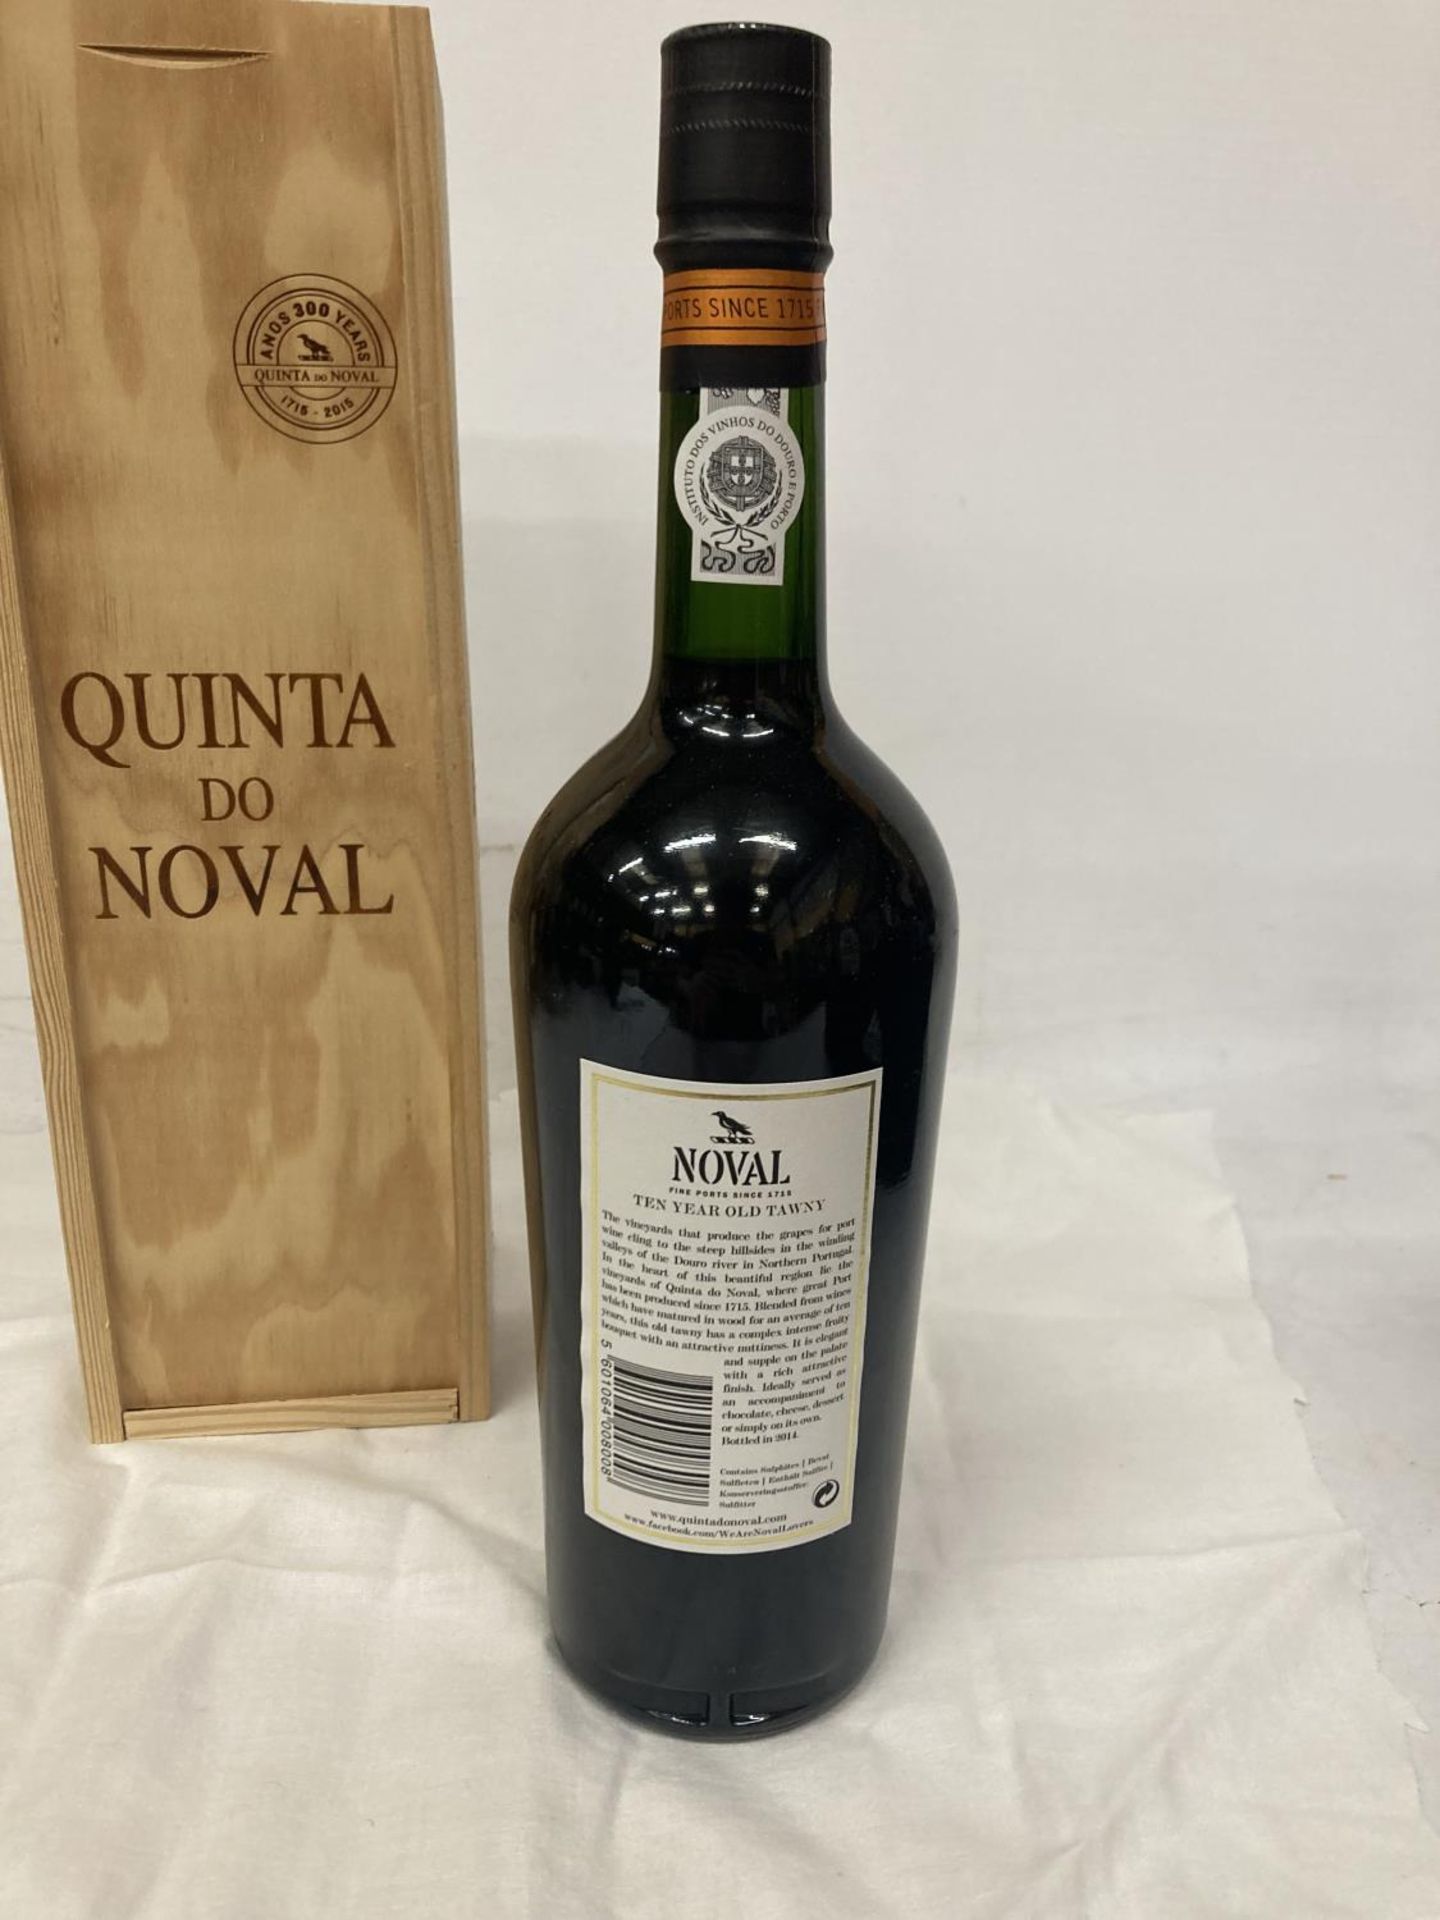 A 75CL BOTTLE OF NOVAL 10 YEAR OLD TAWNY PORT IN A WOODEN BOX - Image 3 of 4